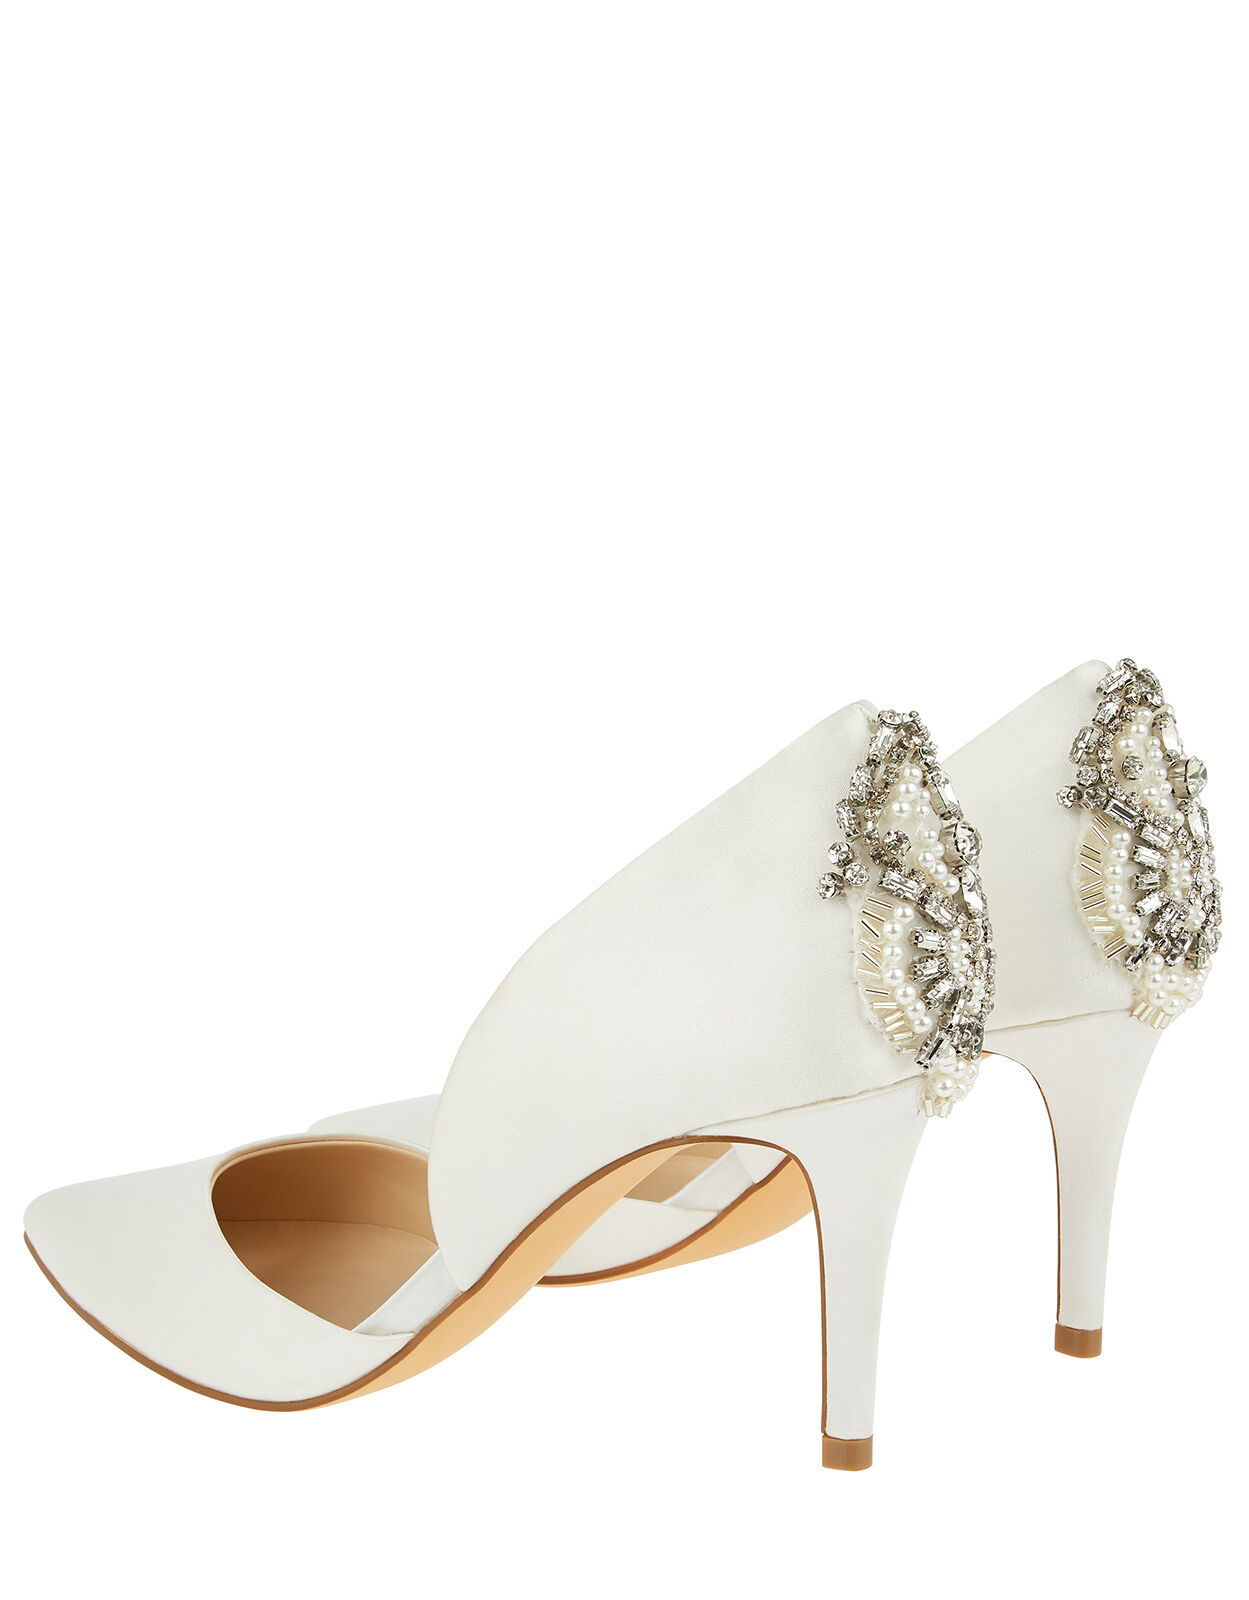 Evie Satin Bridal Court Shoes with 